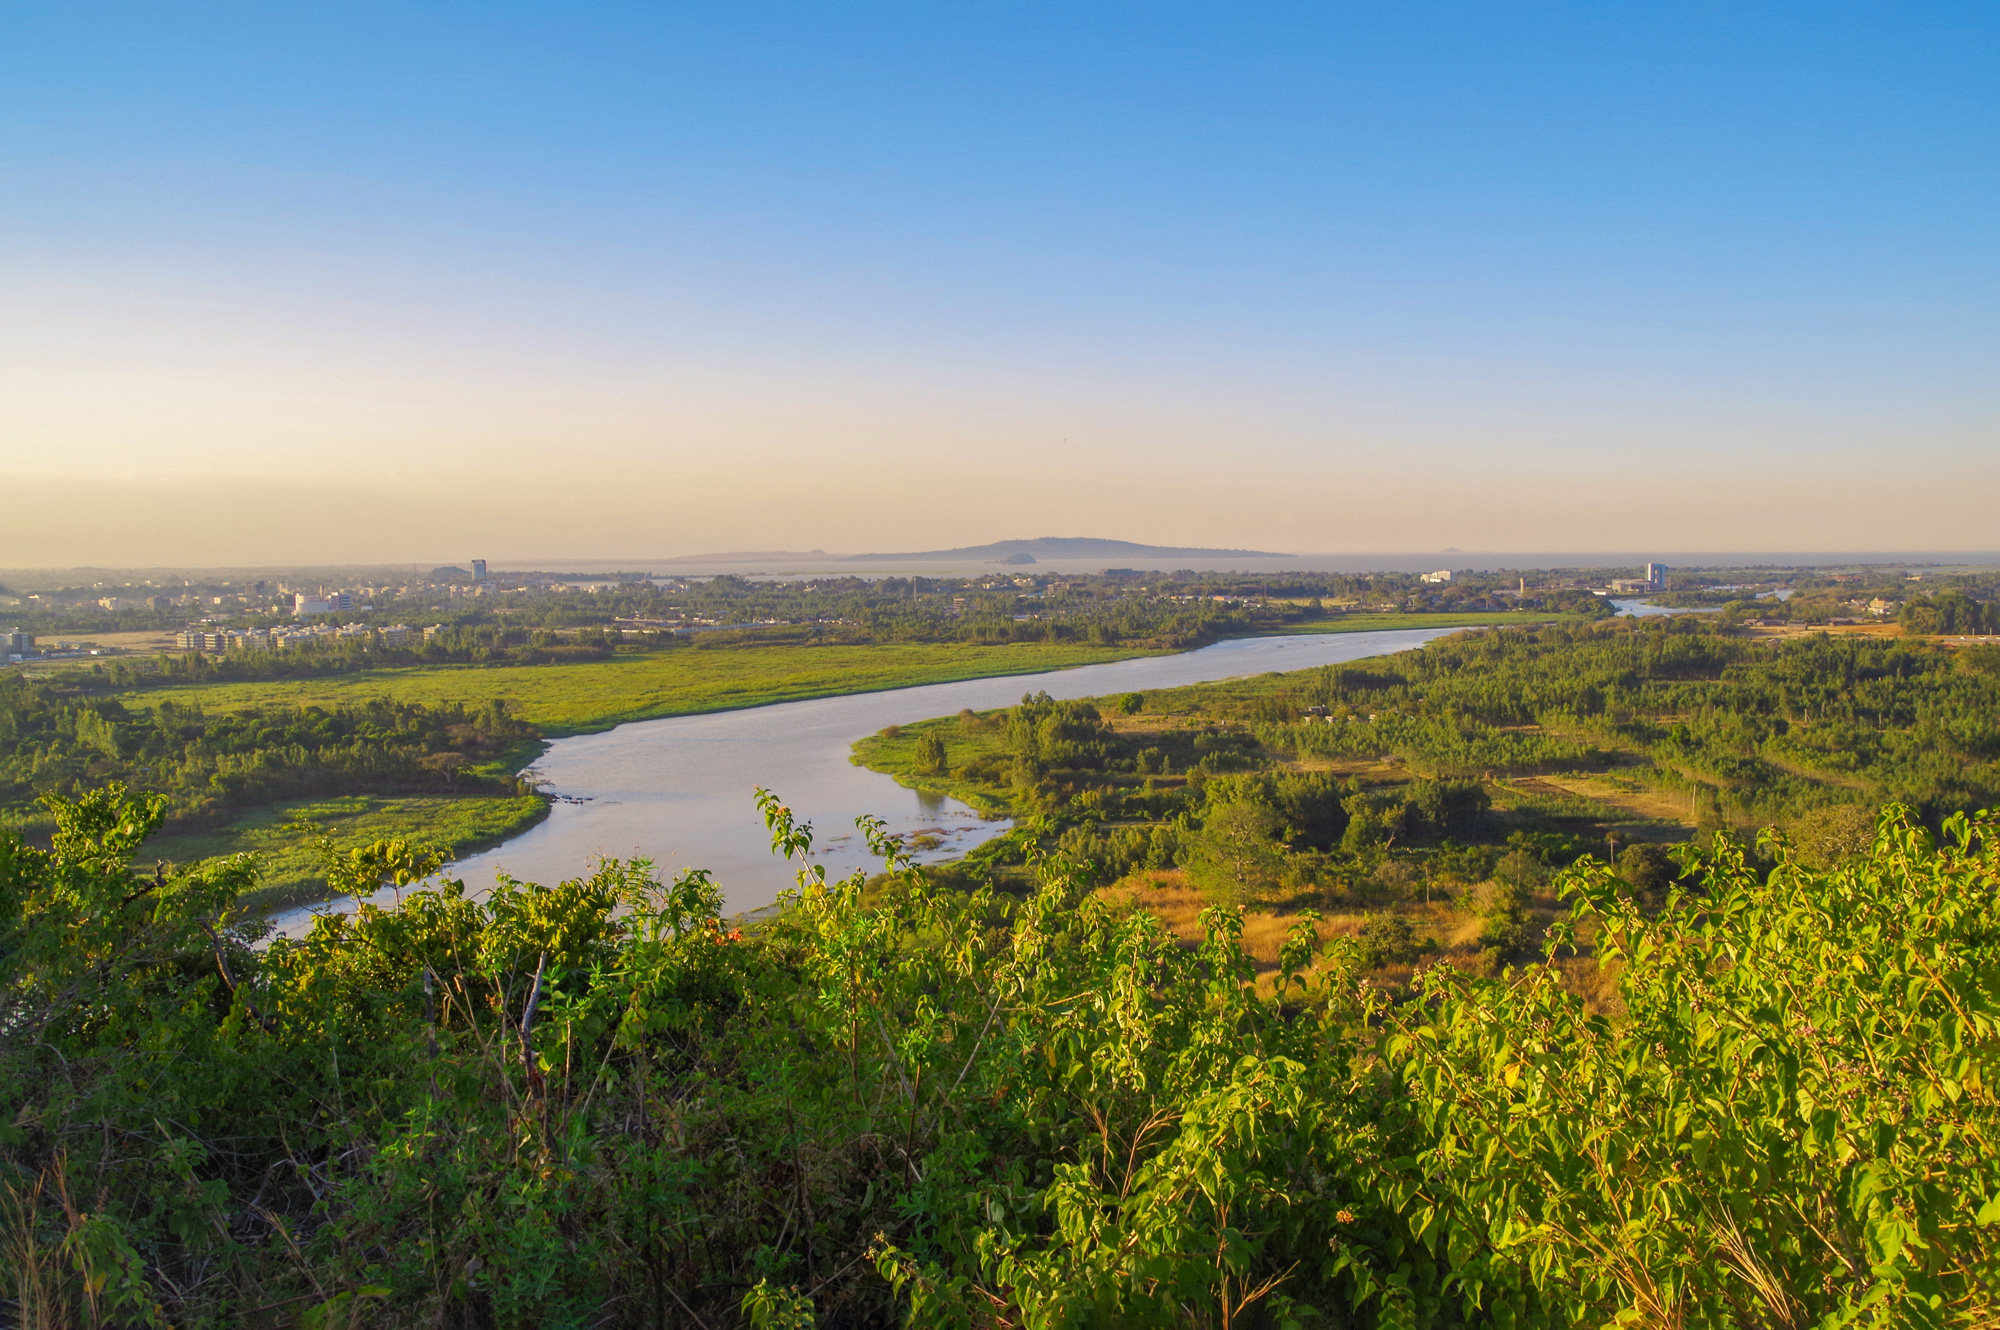 A view of the Blue Nile river in Ethiopia's Amhara region. The absence of billboards on the wide open roads, many still under construction, enables unobstructed views of the landscape